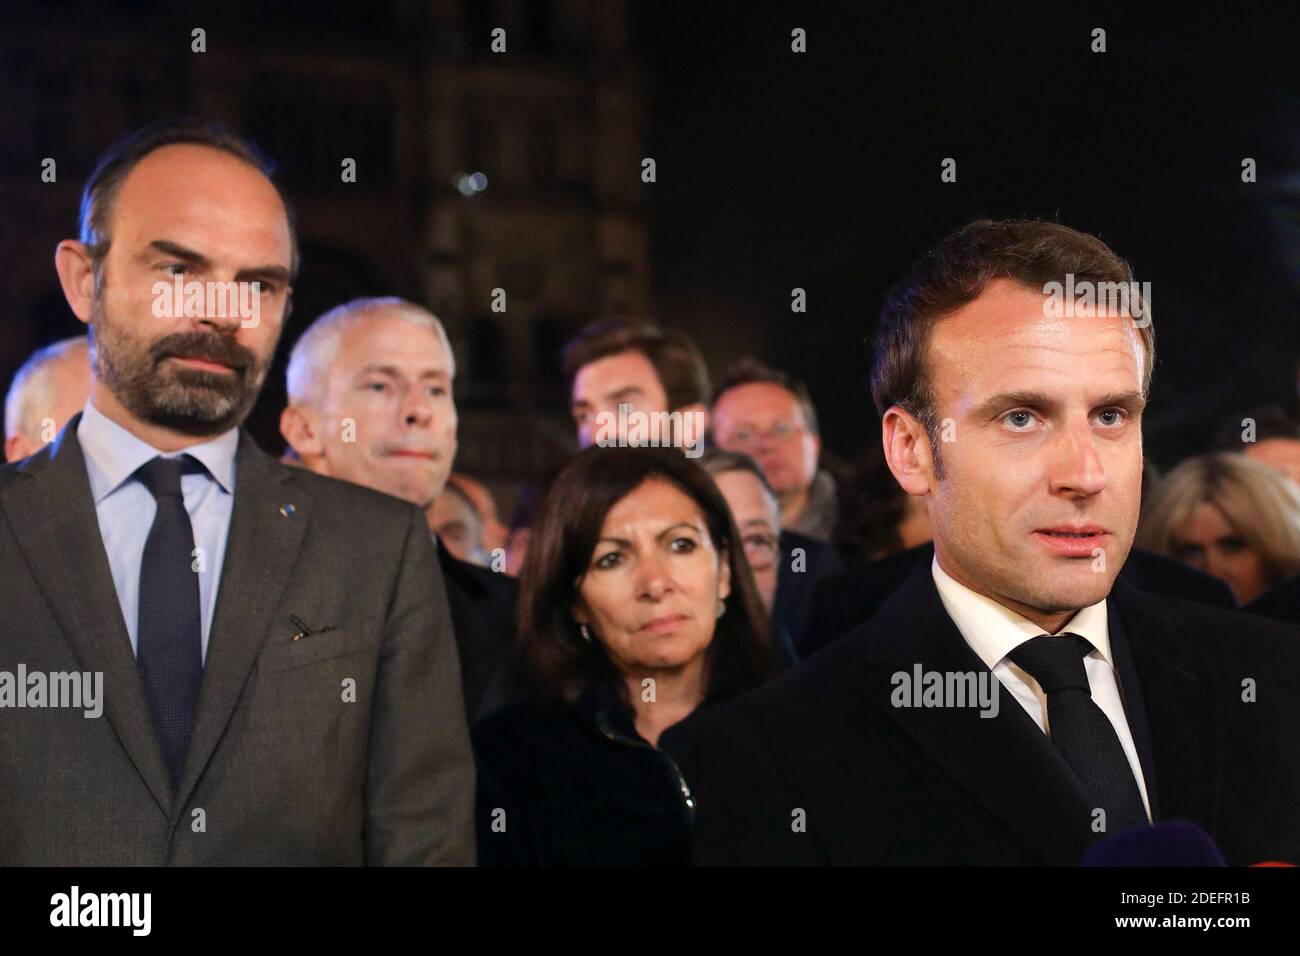 French President Emmanuel Macron is accompanied by Mayor of Paris Anne Hidalgo, French Prime Minister Edouard Philippe, French Culture Minister Franck Riester, and Archbishop of Paris Michel Aupetit, as he speaks at Notre-Dame Cathedral in Paris on April 15, 2019, after a fire engulfed the building. A fire broke out at the landmark Notre-Dame Cathedral in central Paris, potentially involving renovation works being carried out at the site, the fire service said.Images posted on social media showed flames and huge clouds of smoke billowing above the roof of the gothic cathedral, the most visited Stock Photo